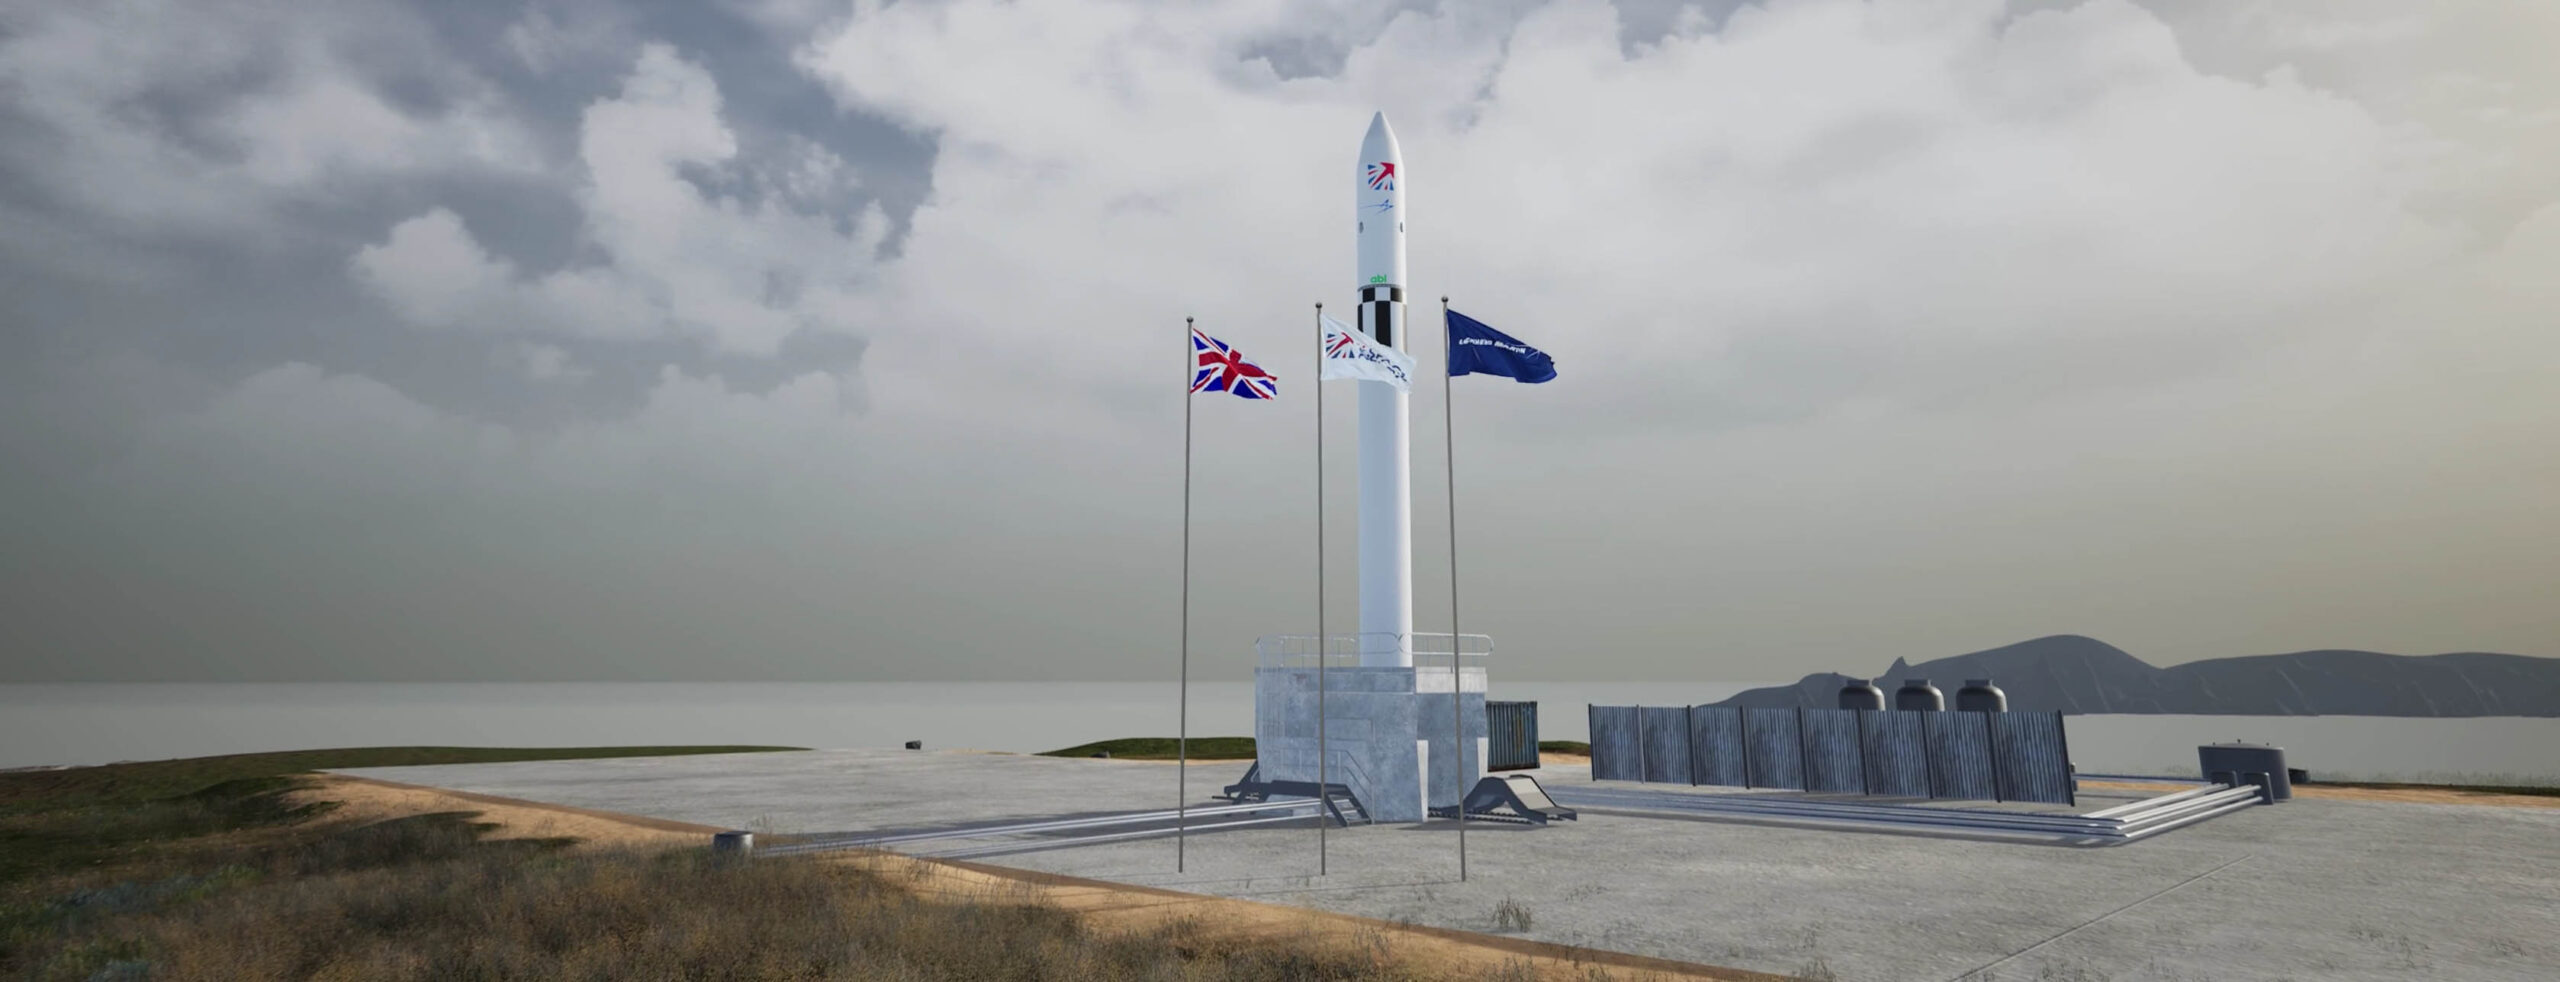 UK Space Agency Launch Site Project